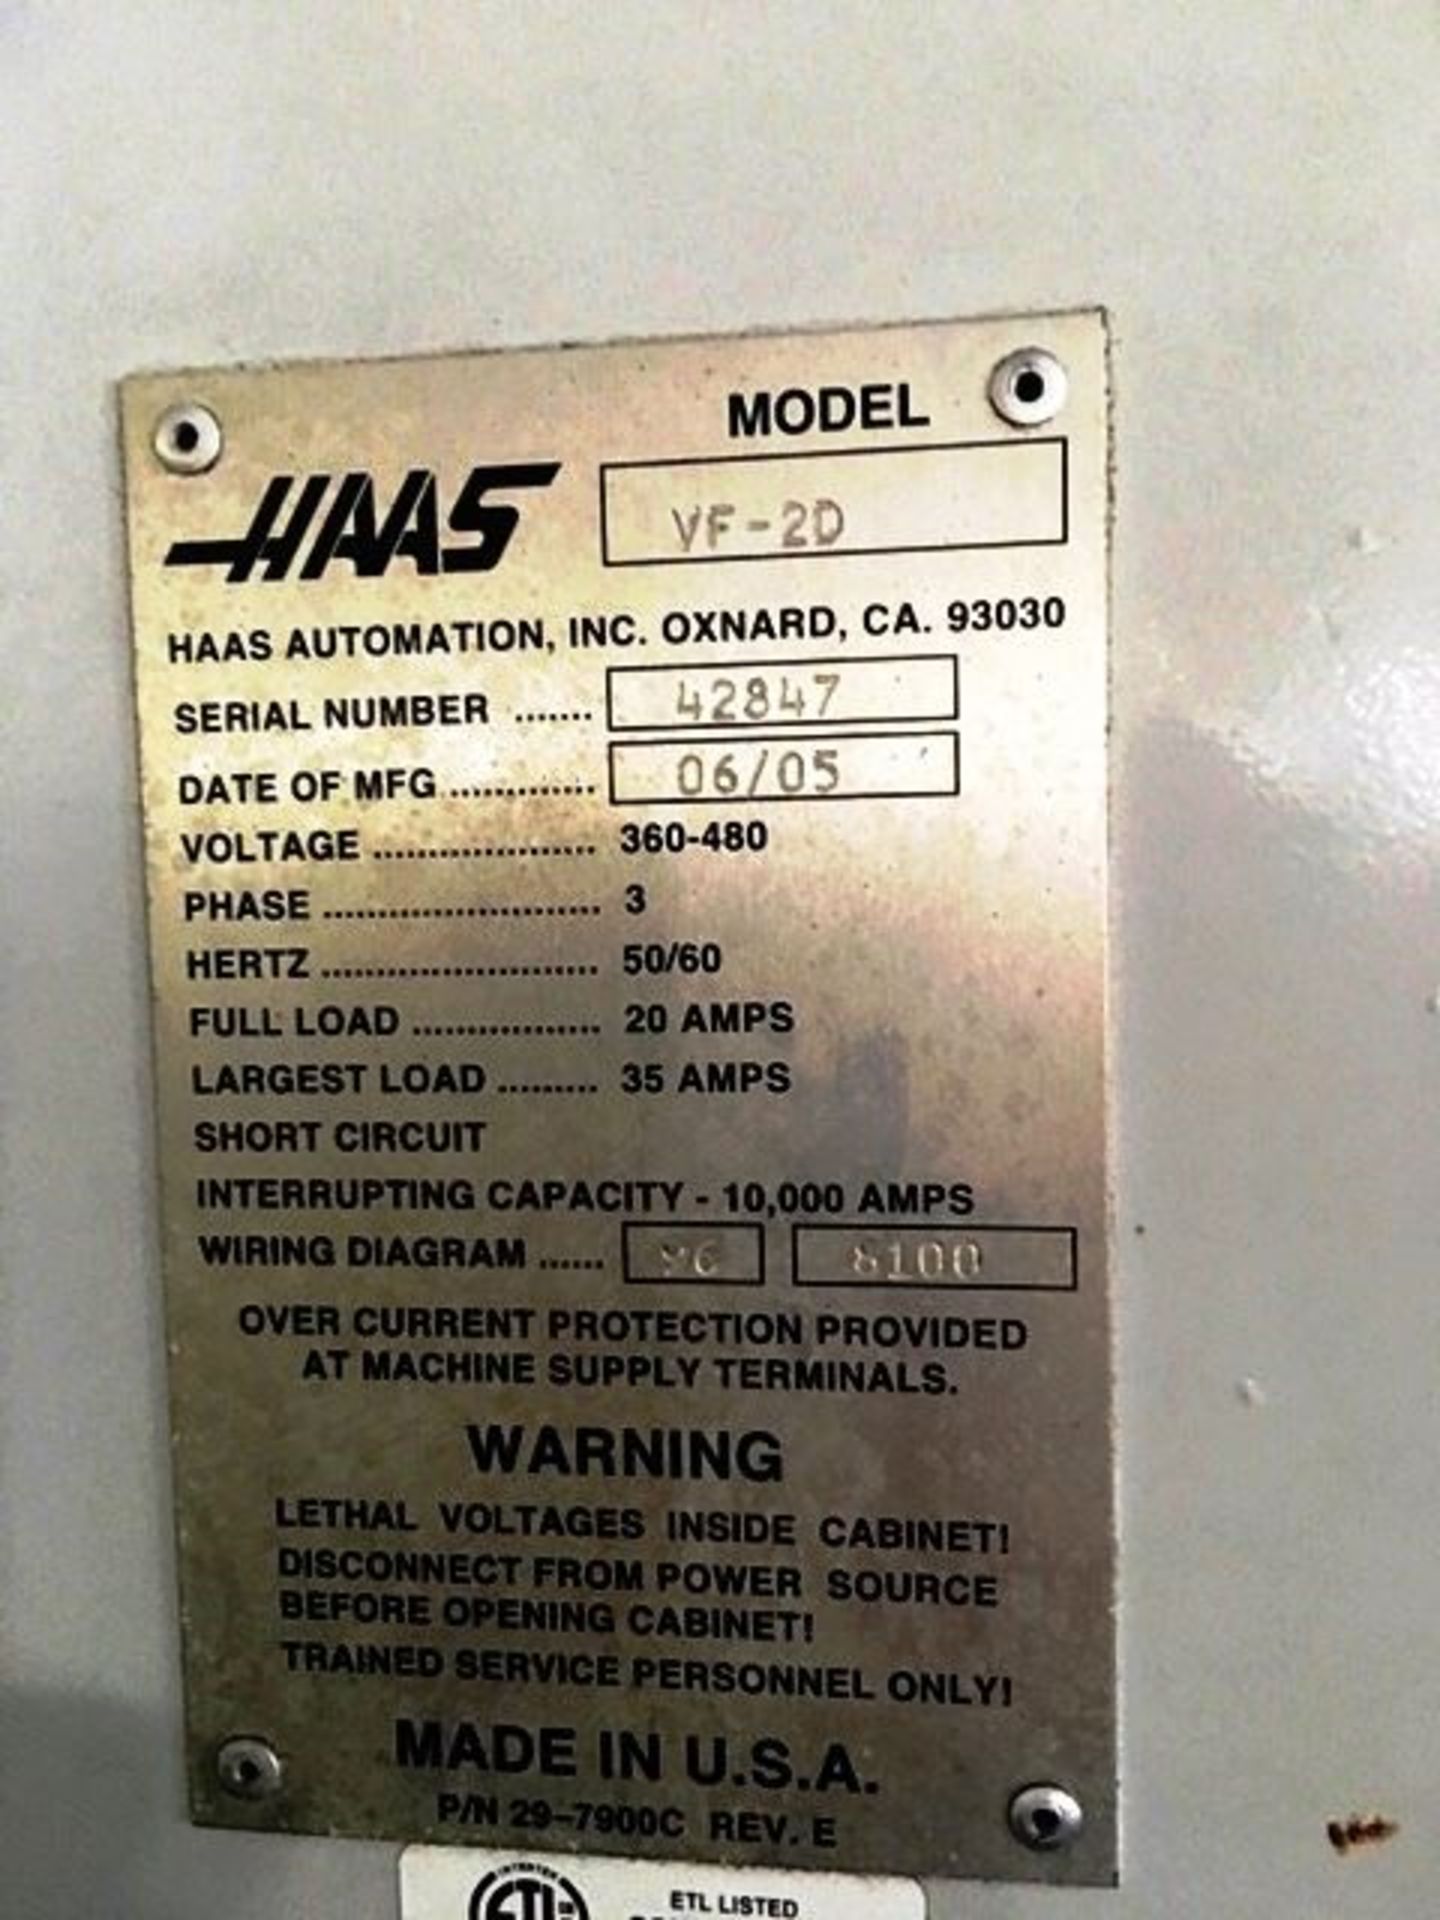 Haas VF-2D CNC Machining Center, S/N 42847, New 2005 - Image 4 of 5